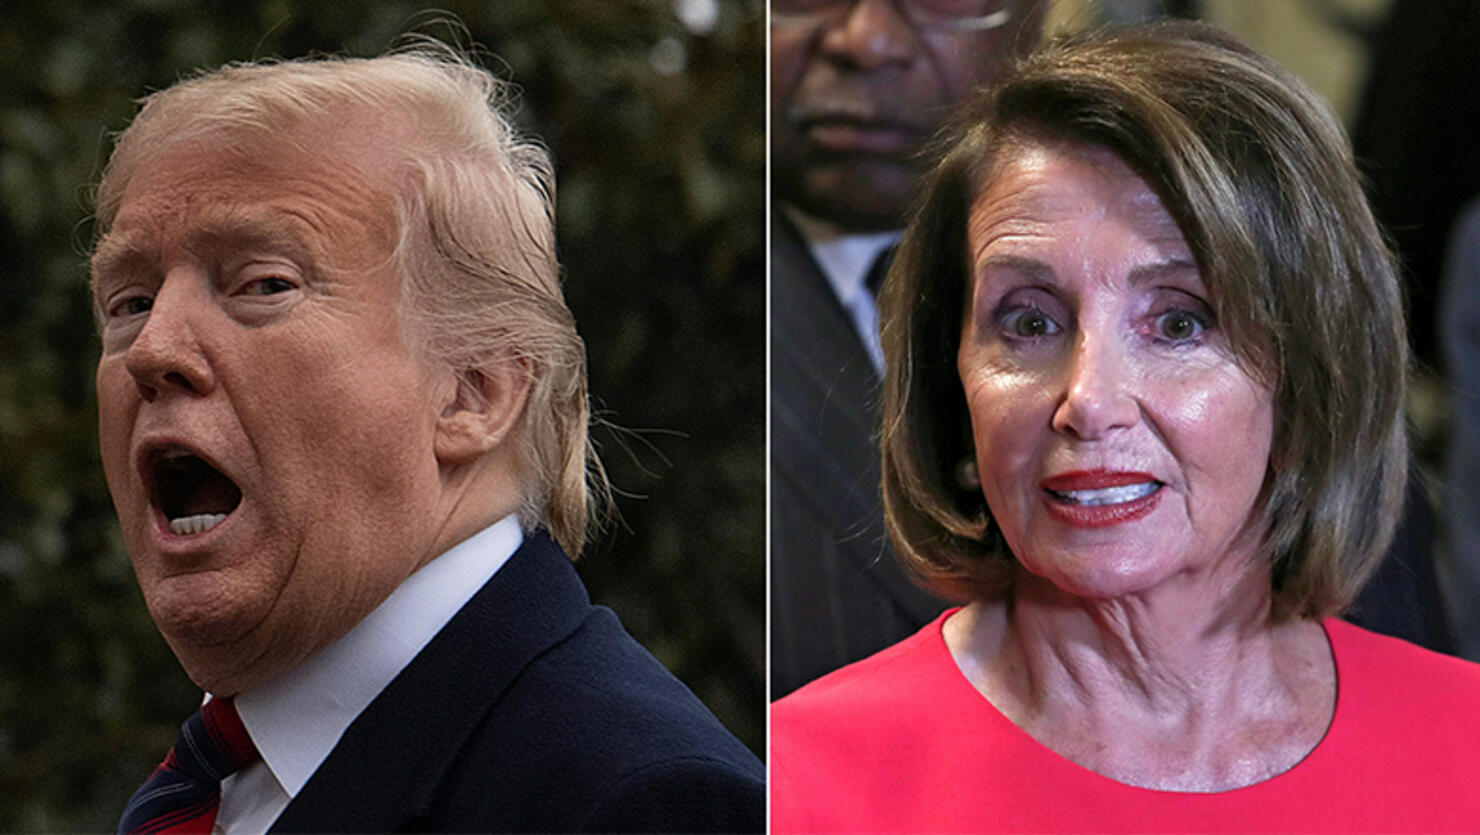 This combination of file pictures created on January 20, 2019 shows US President Donald Trump as he arrives at the White House in Washington, DC, on January 19, 2019,and Speaker of the House Nancy Pelosi (D-NY) outside the House Chamber on Capitol Hill in Washington, DC on January 3, 2019